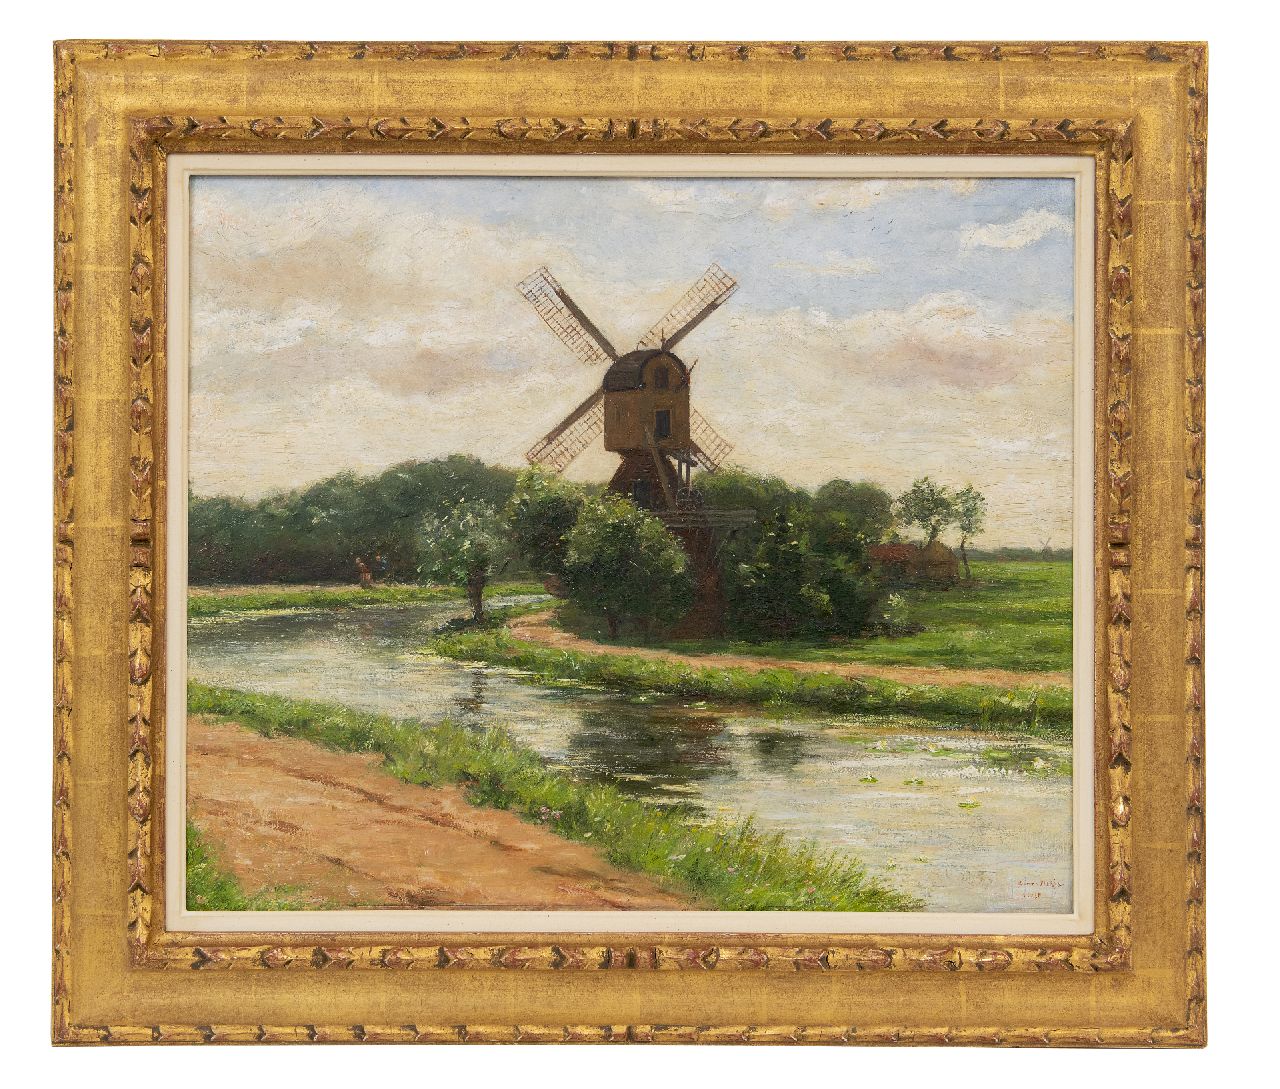 Maris S.W.  | Simon Willem Maris, Windmill 't Haantje along the Smal Weesp in Weesp, oil on panel 45.0 x 54.2 cm, signed l.r.